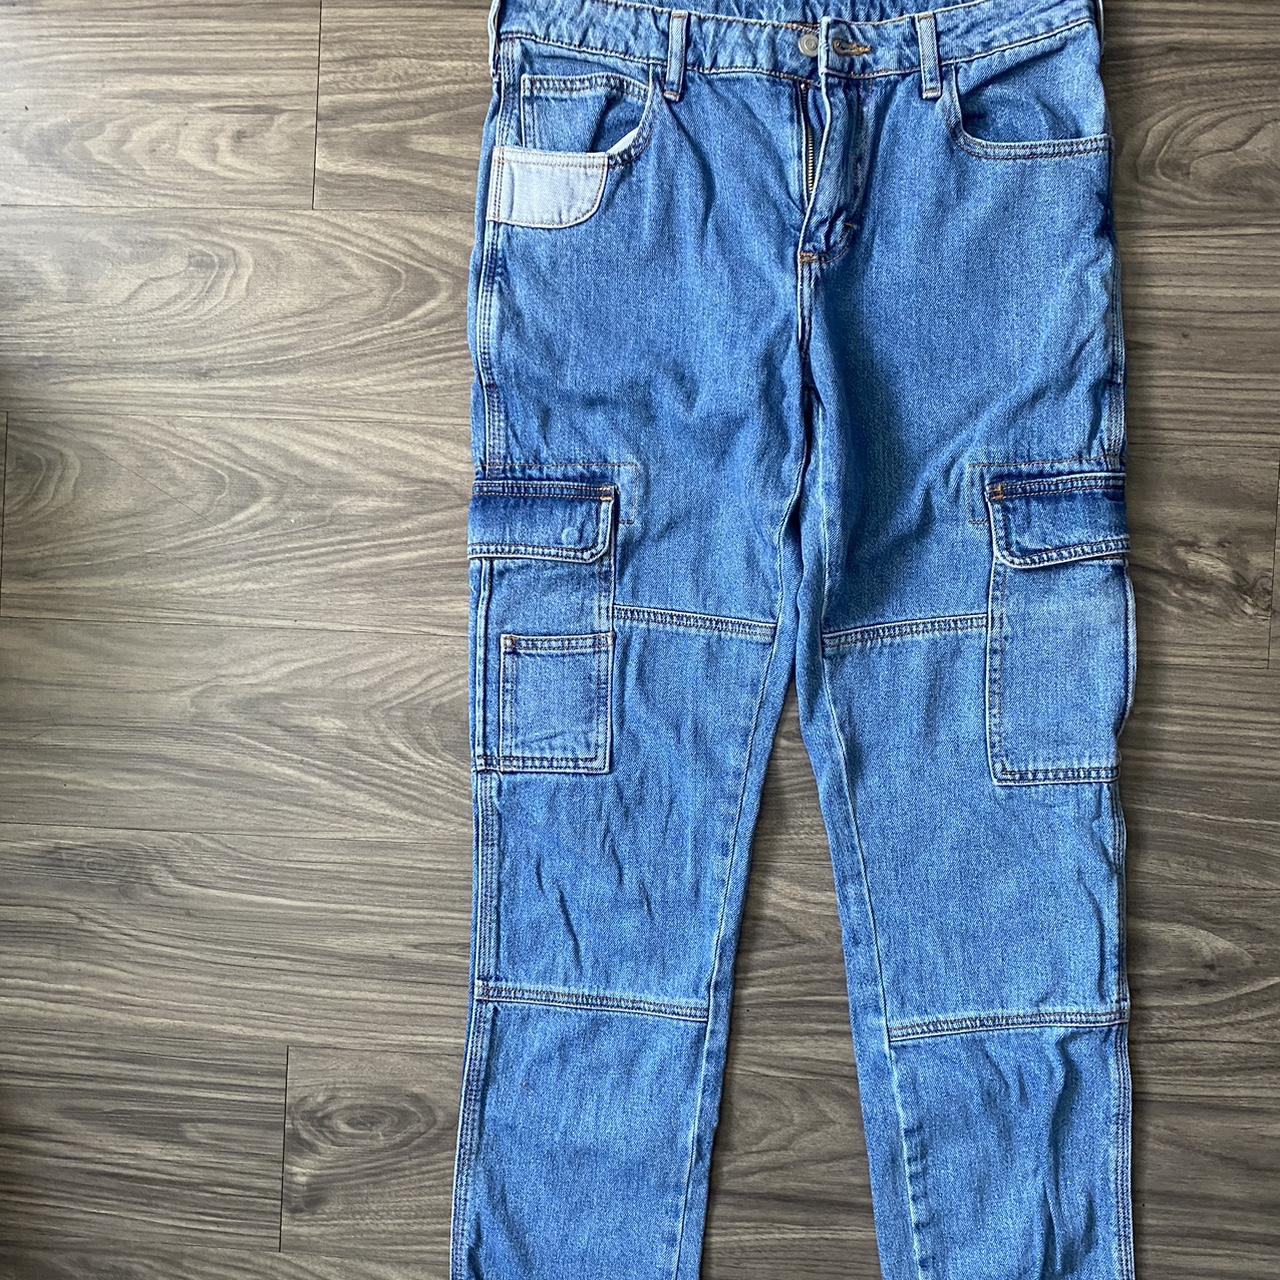 Asos Women’s Cargo Skinny Jeans. Fit 36 inches in... - Depop